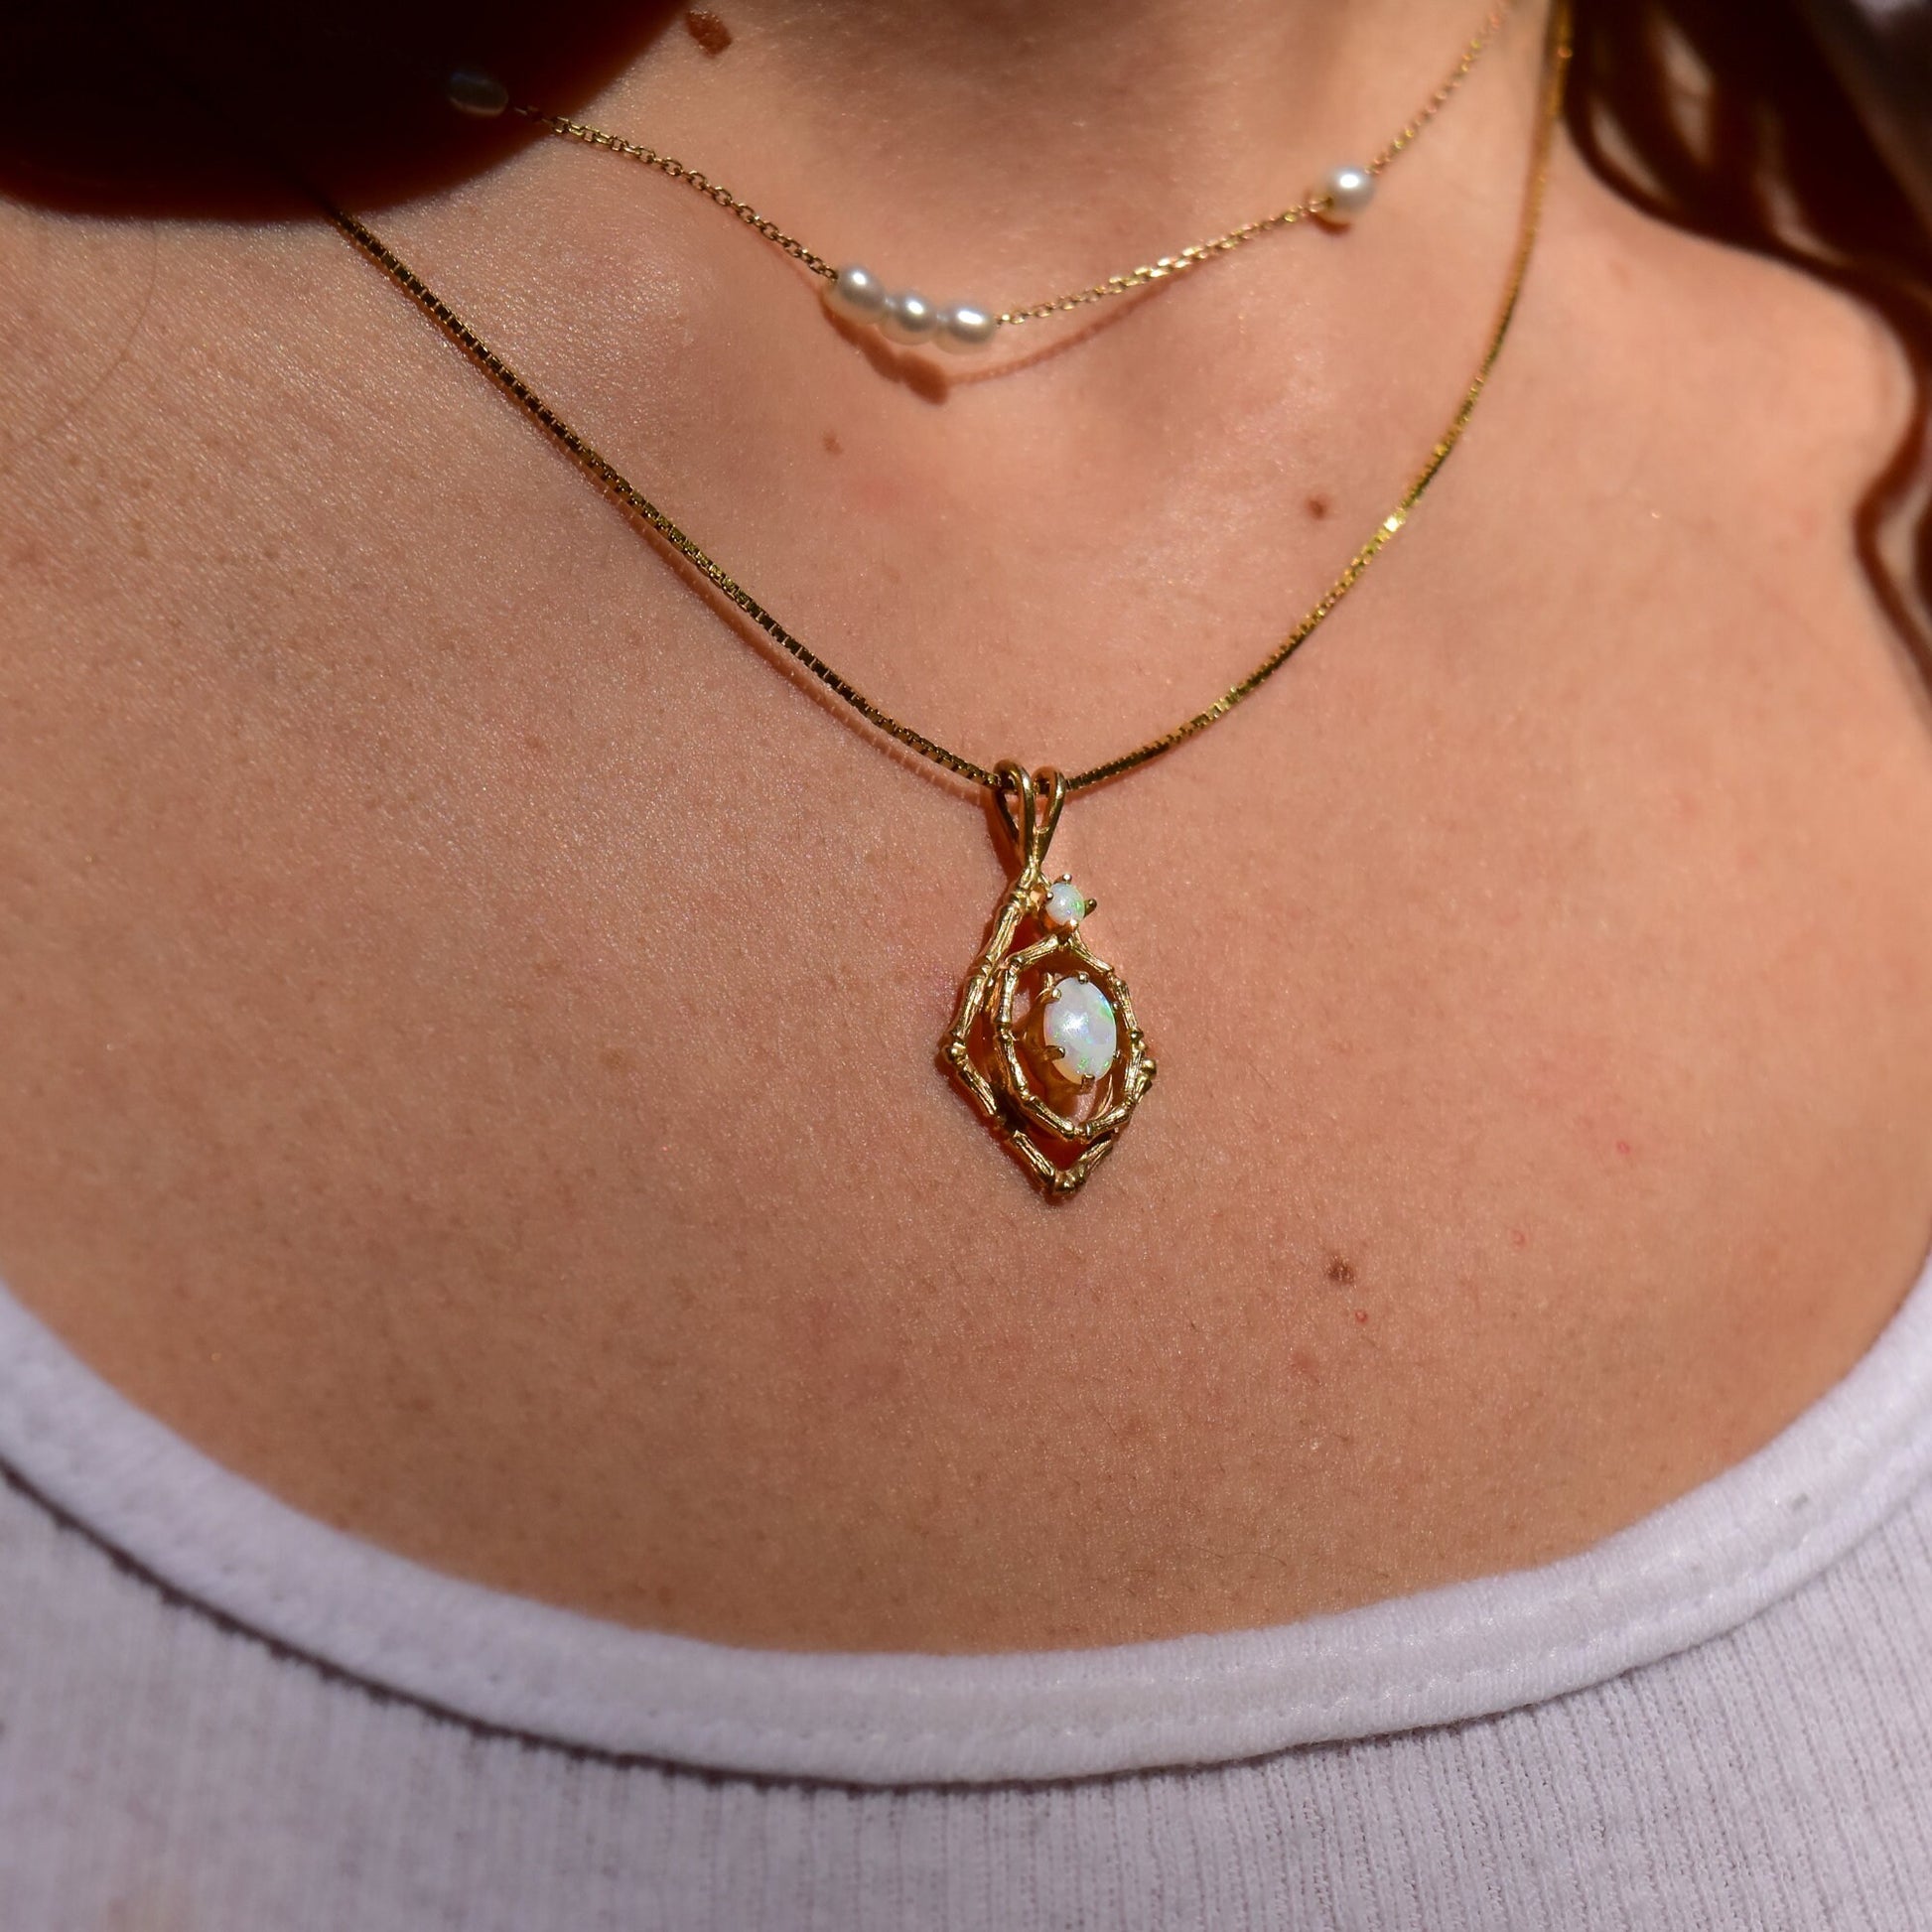 10K yellow gold vintage estate pendant necklace featuring two oval white opal cabochons accented by bamboo motif, hung from delicate gold chain, shown on model's neck against skin